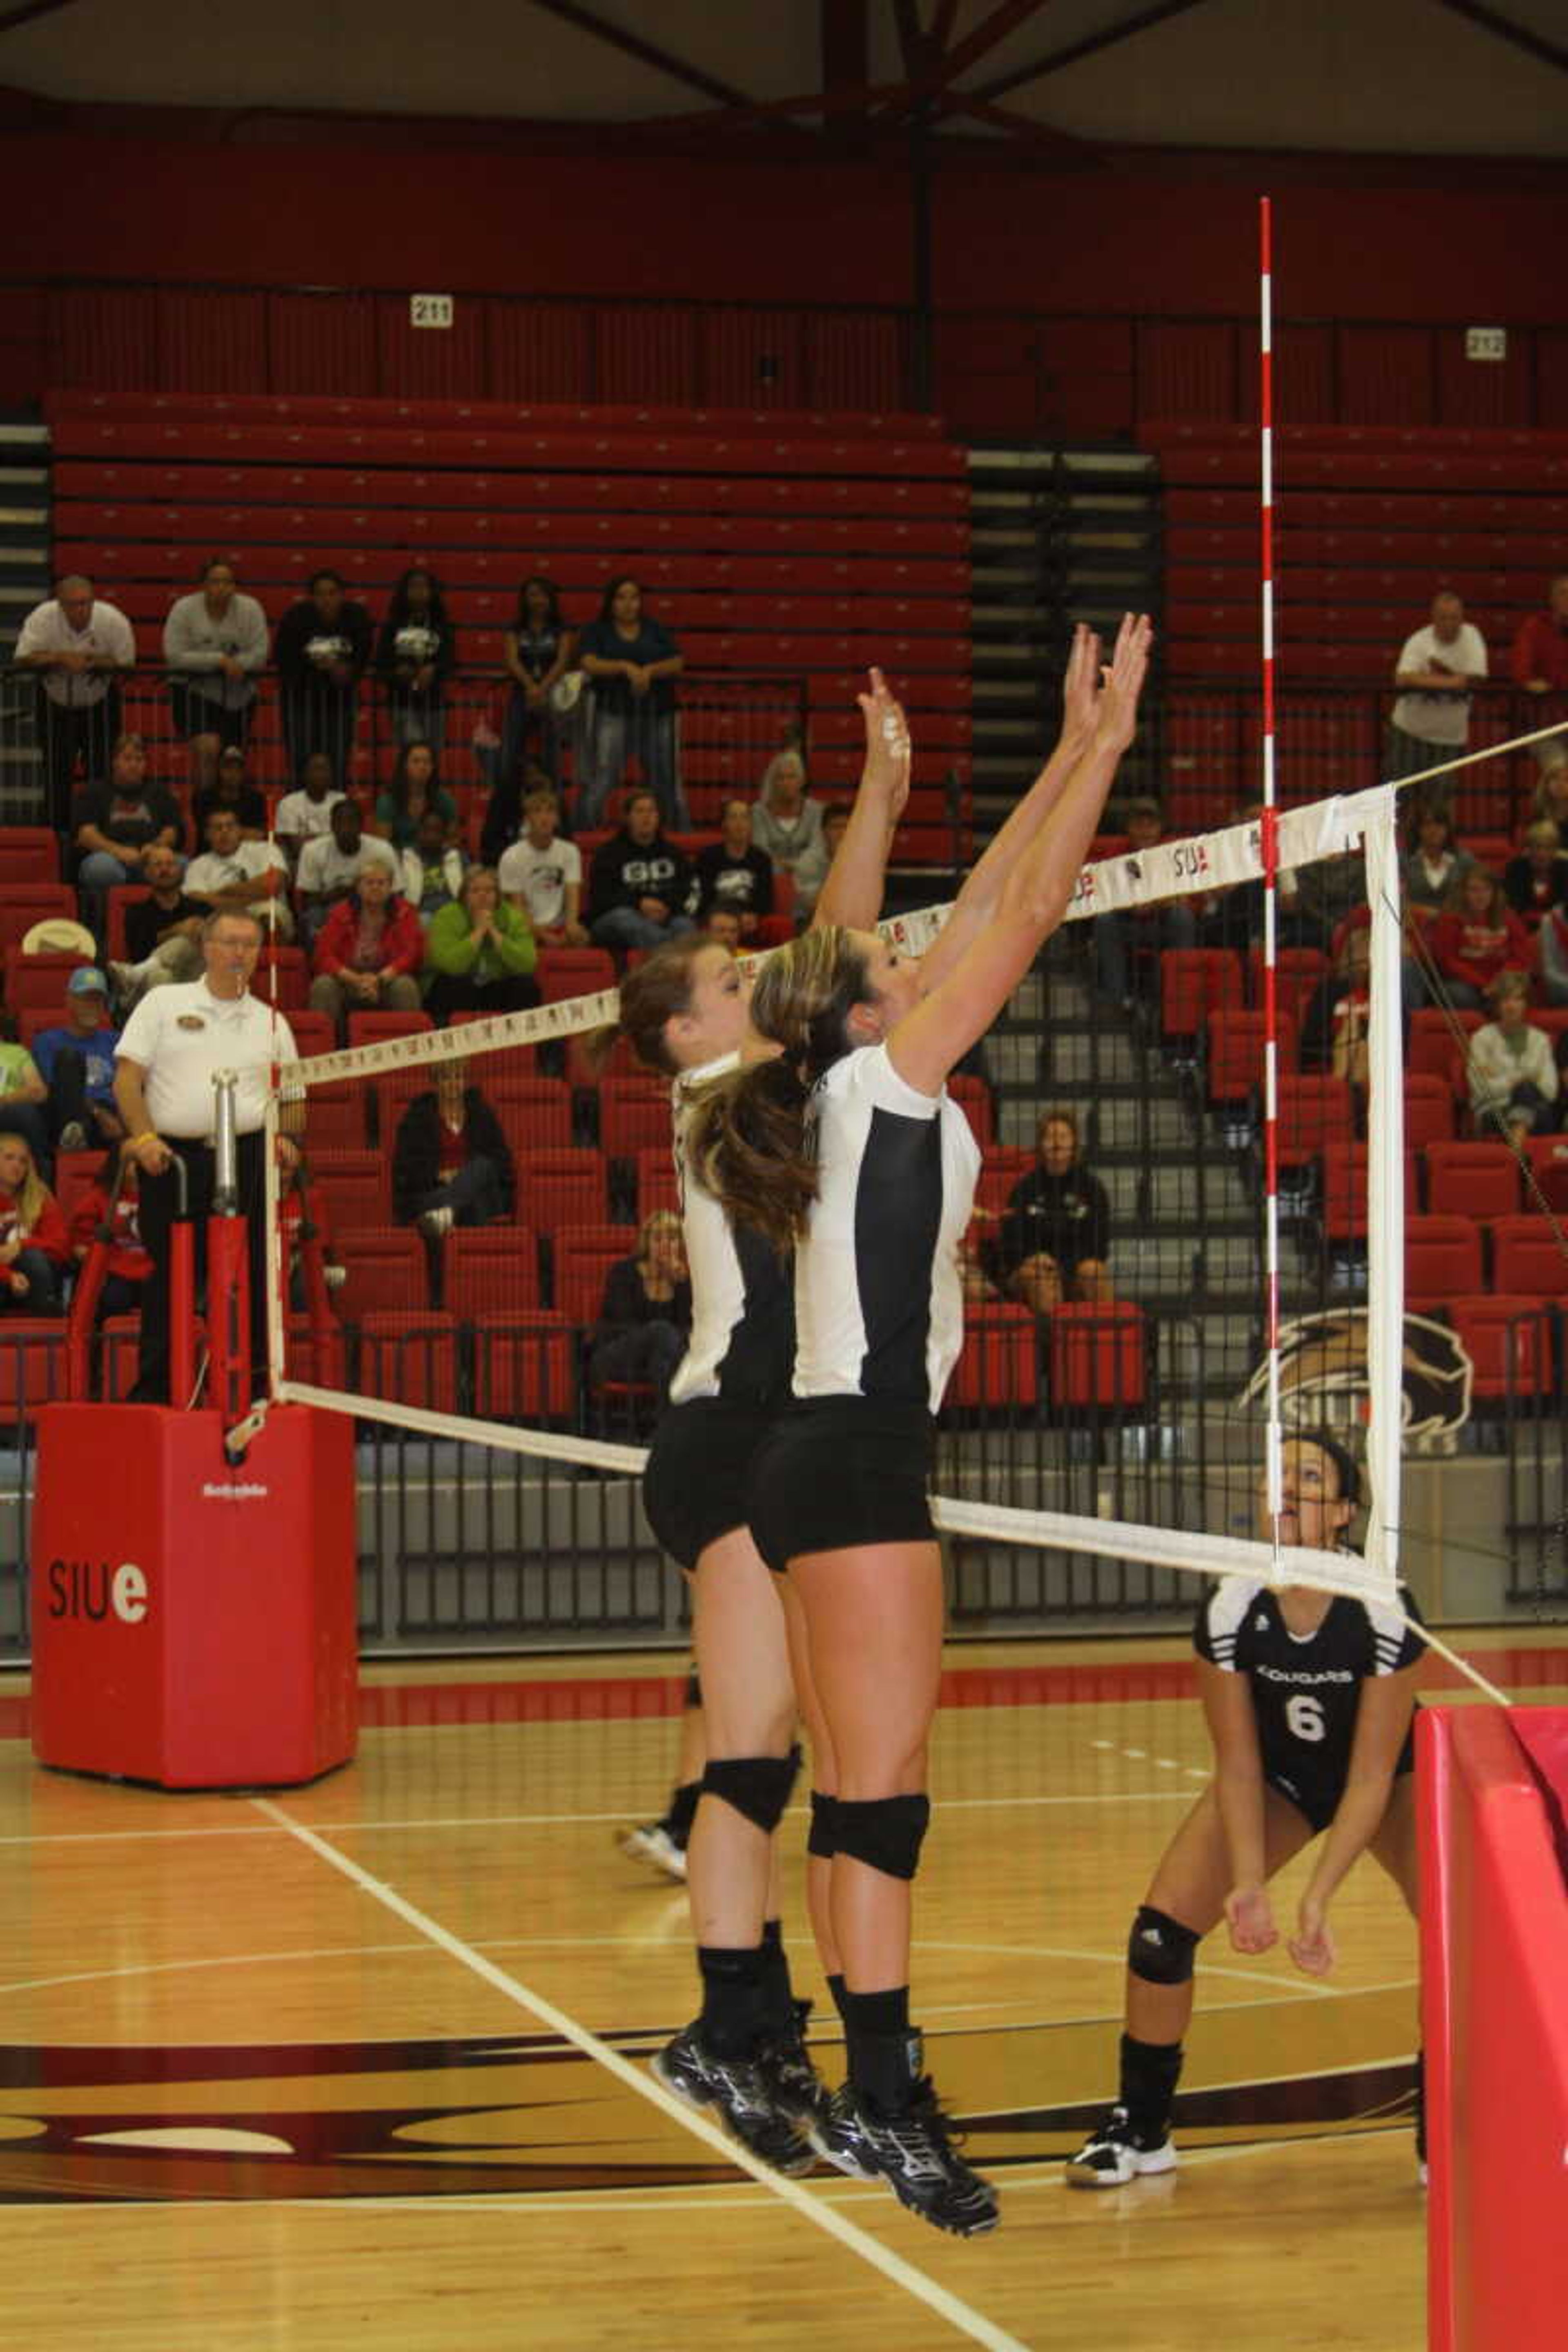 Emily Coon and Paige Dossey attempt to block an SIUE attack. -- Photo by Kelso Hope